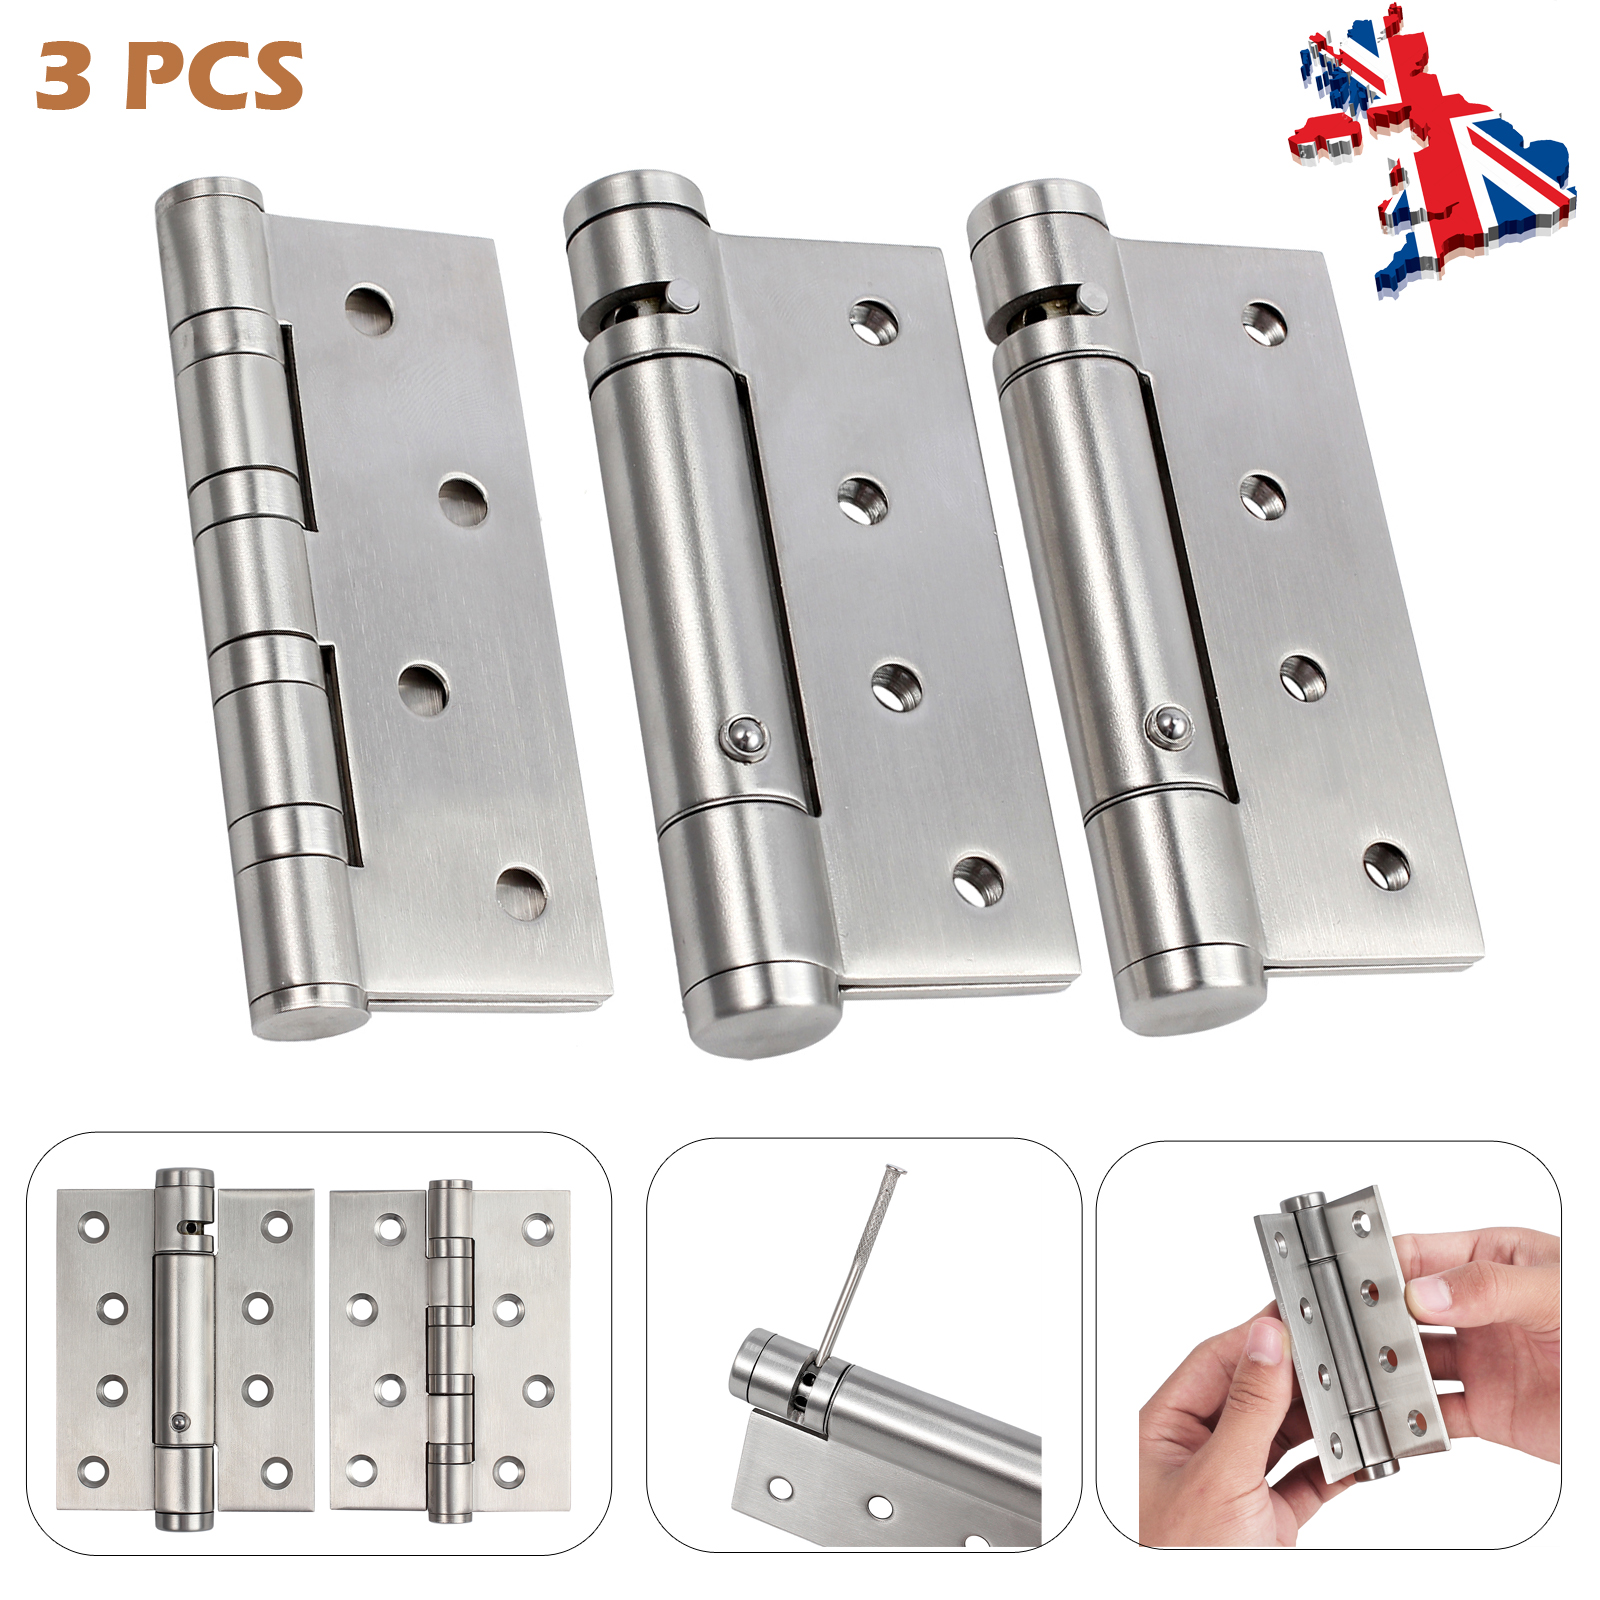 3 x DOOR HINGES FIRE RATED Self Closing Single Action Adjustable Spring CHROME